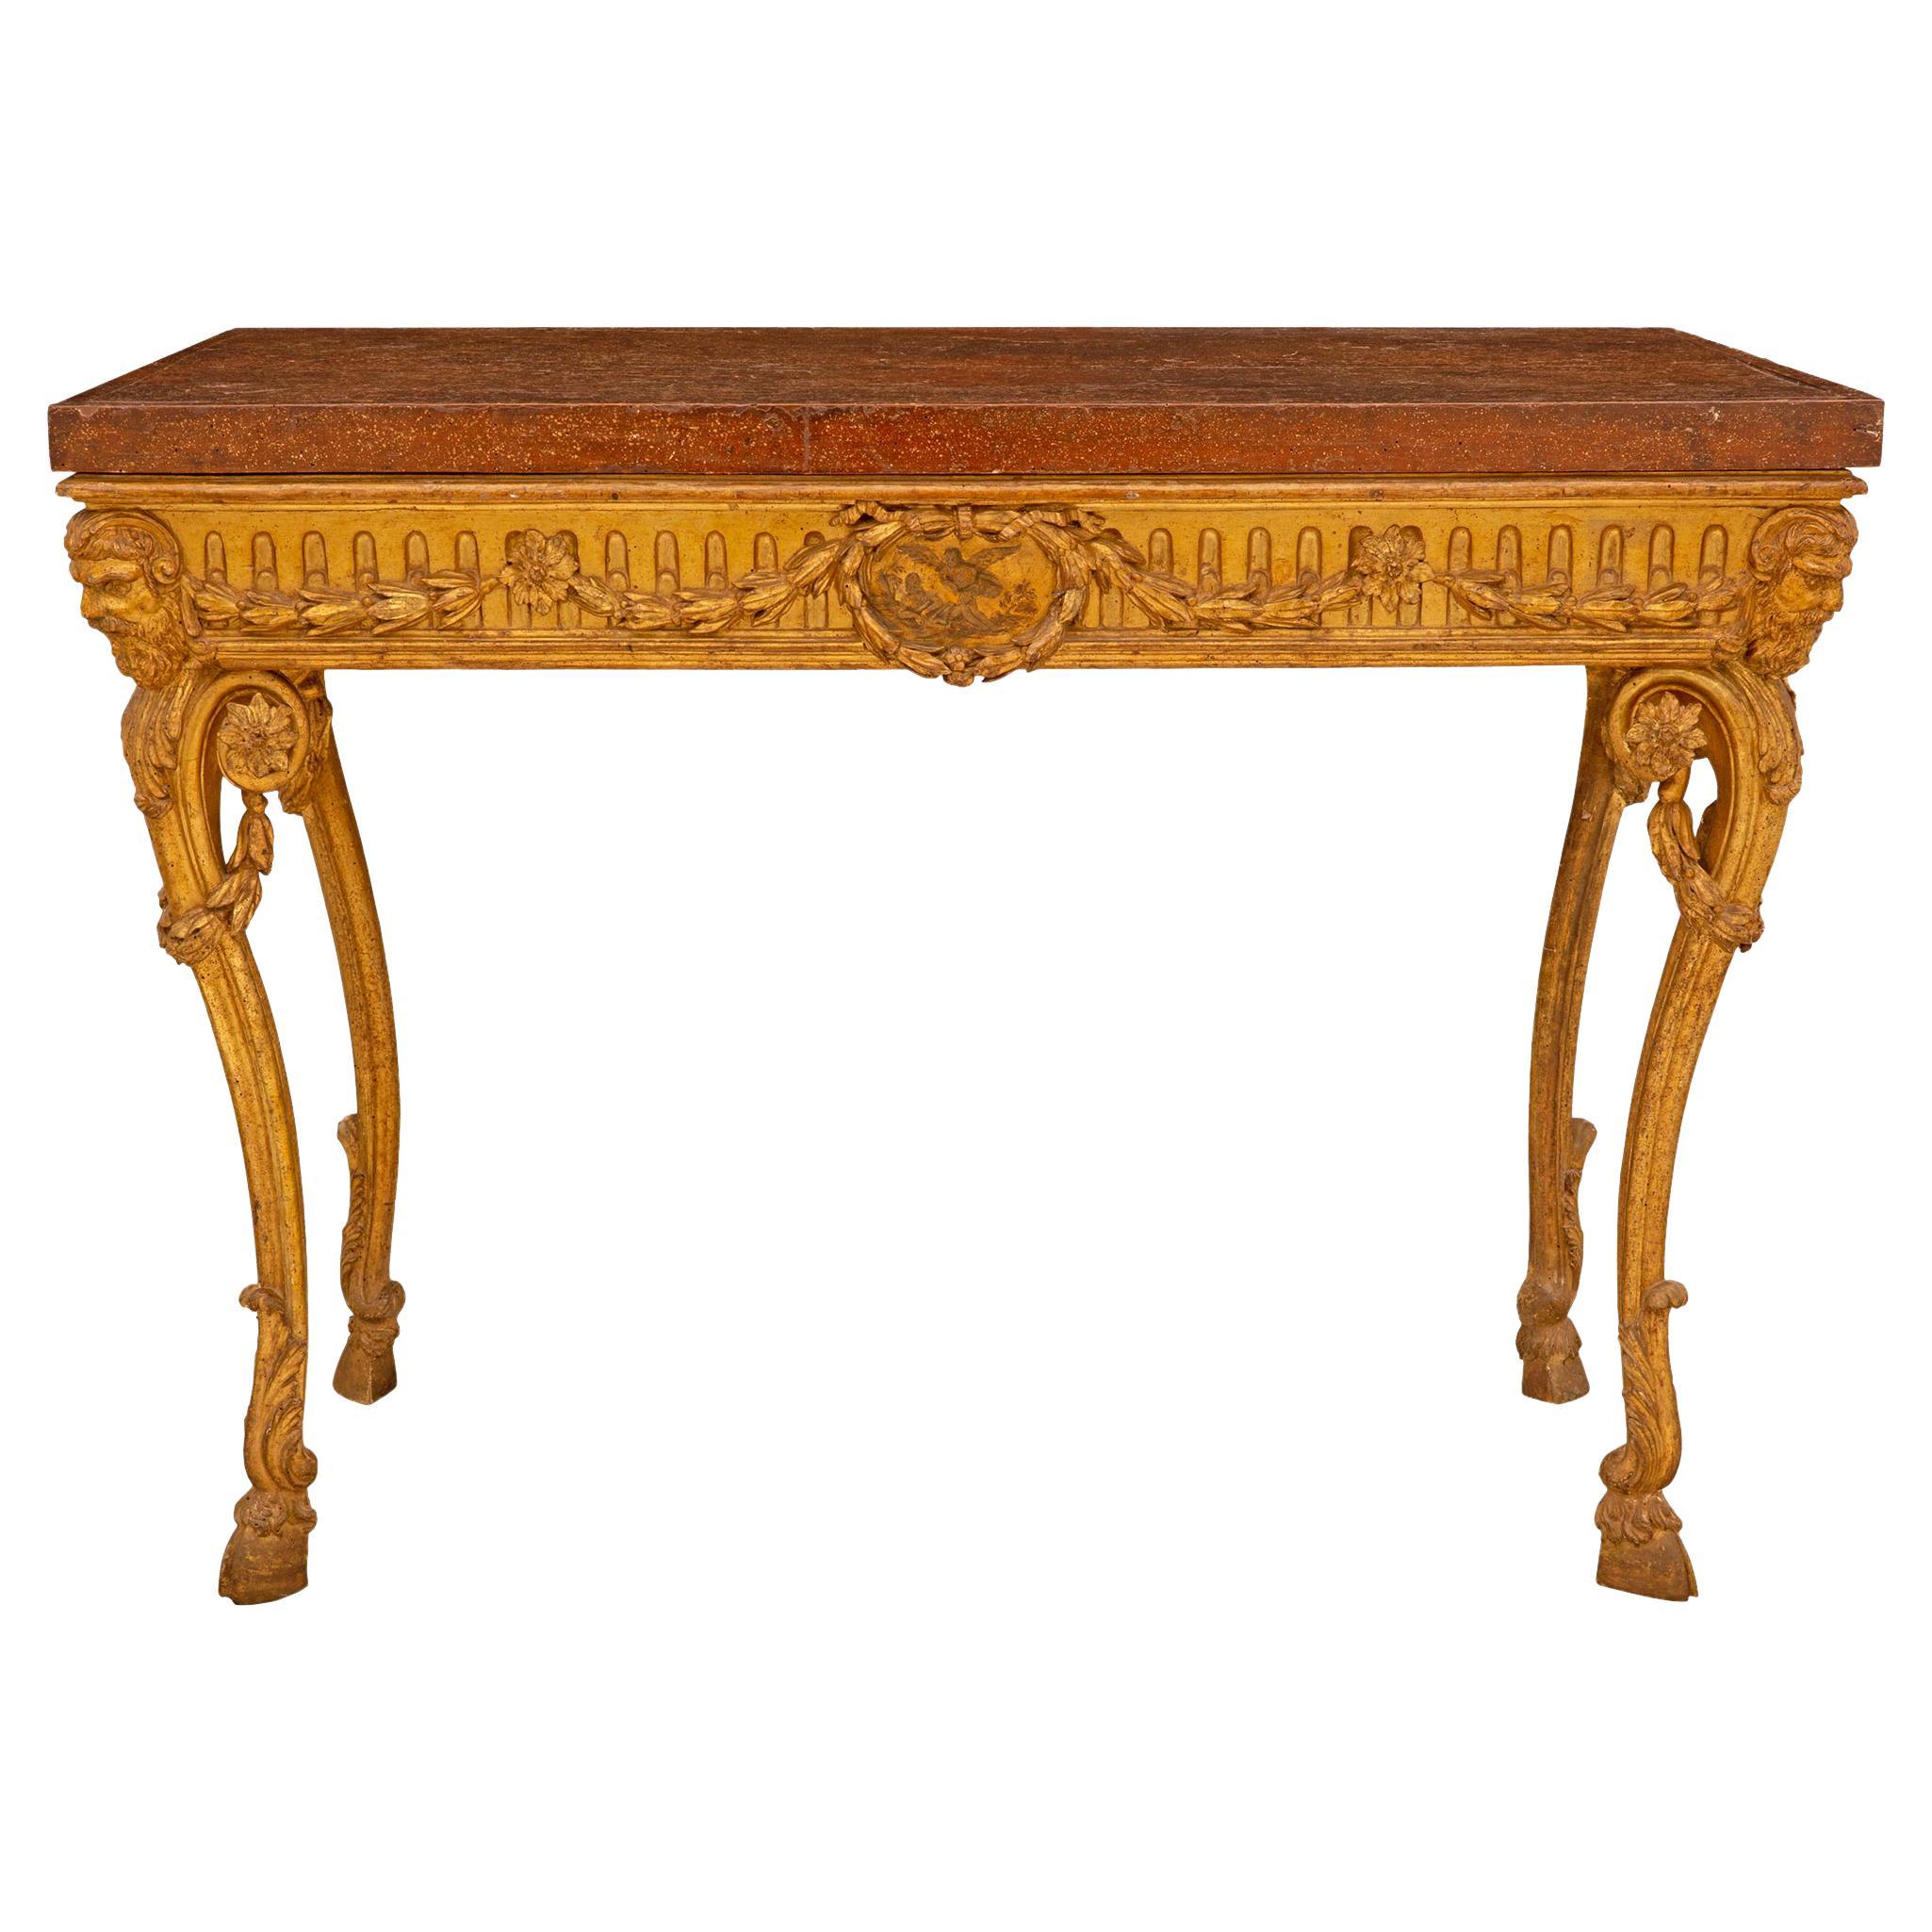 Italian Early 18th Century Louis XIV Period Giltwood and Faux Marble Console